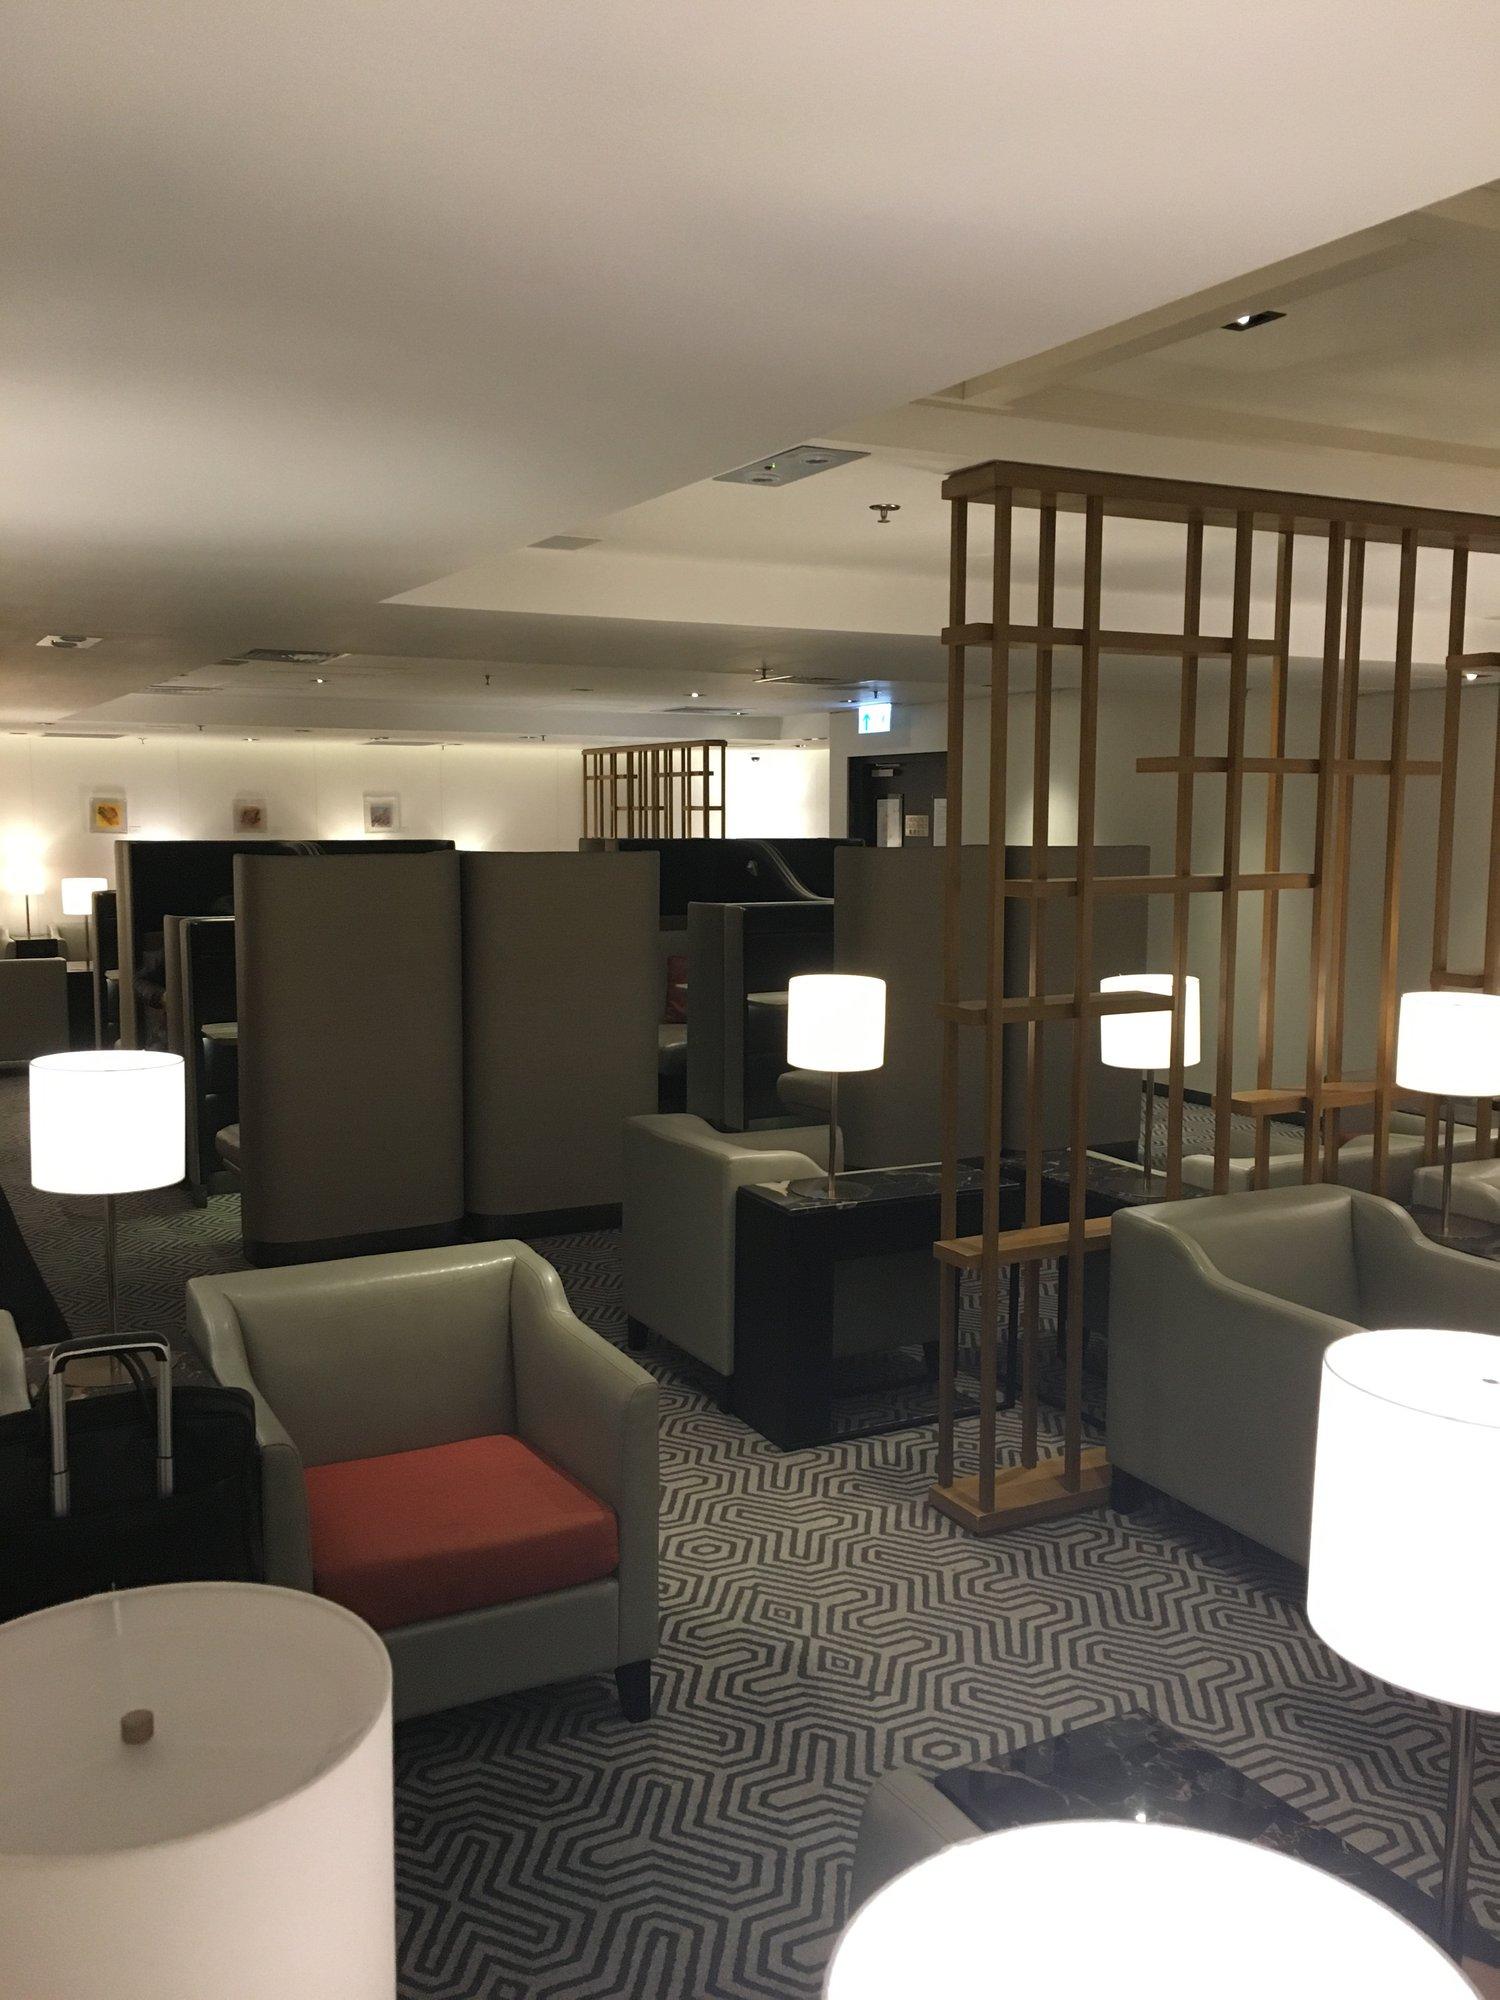 Singapore Airlines SilverKris Business Class Lounge image 25 of 68